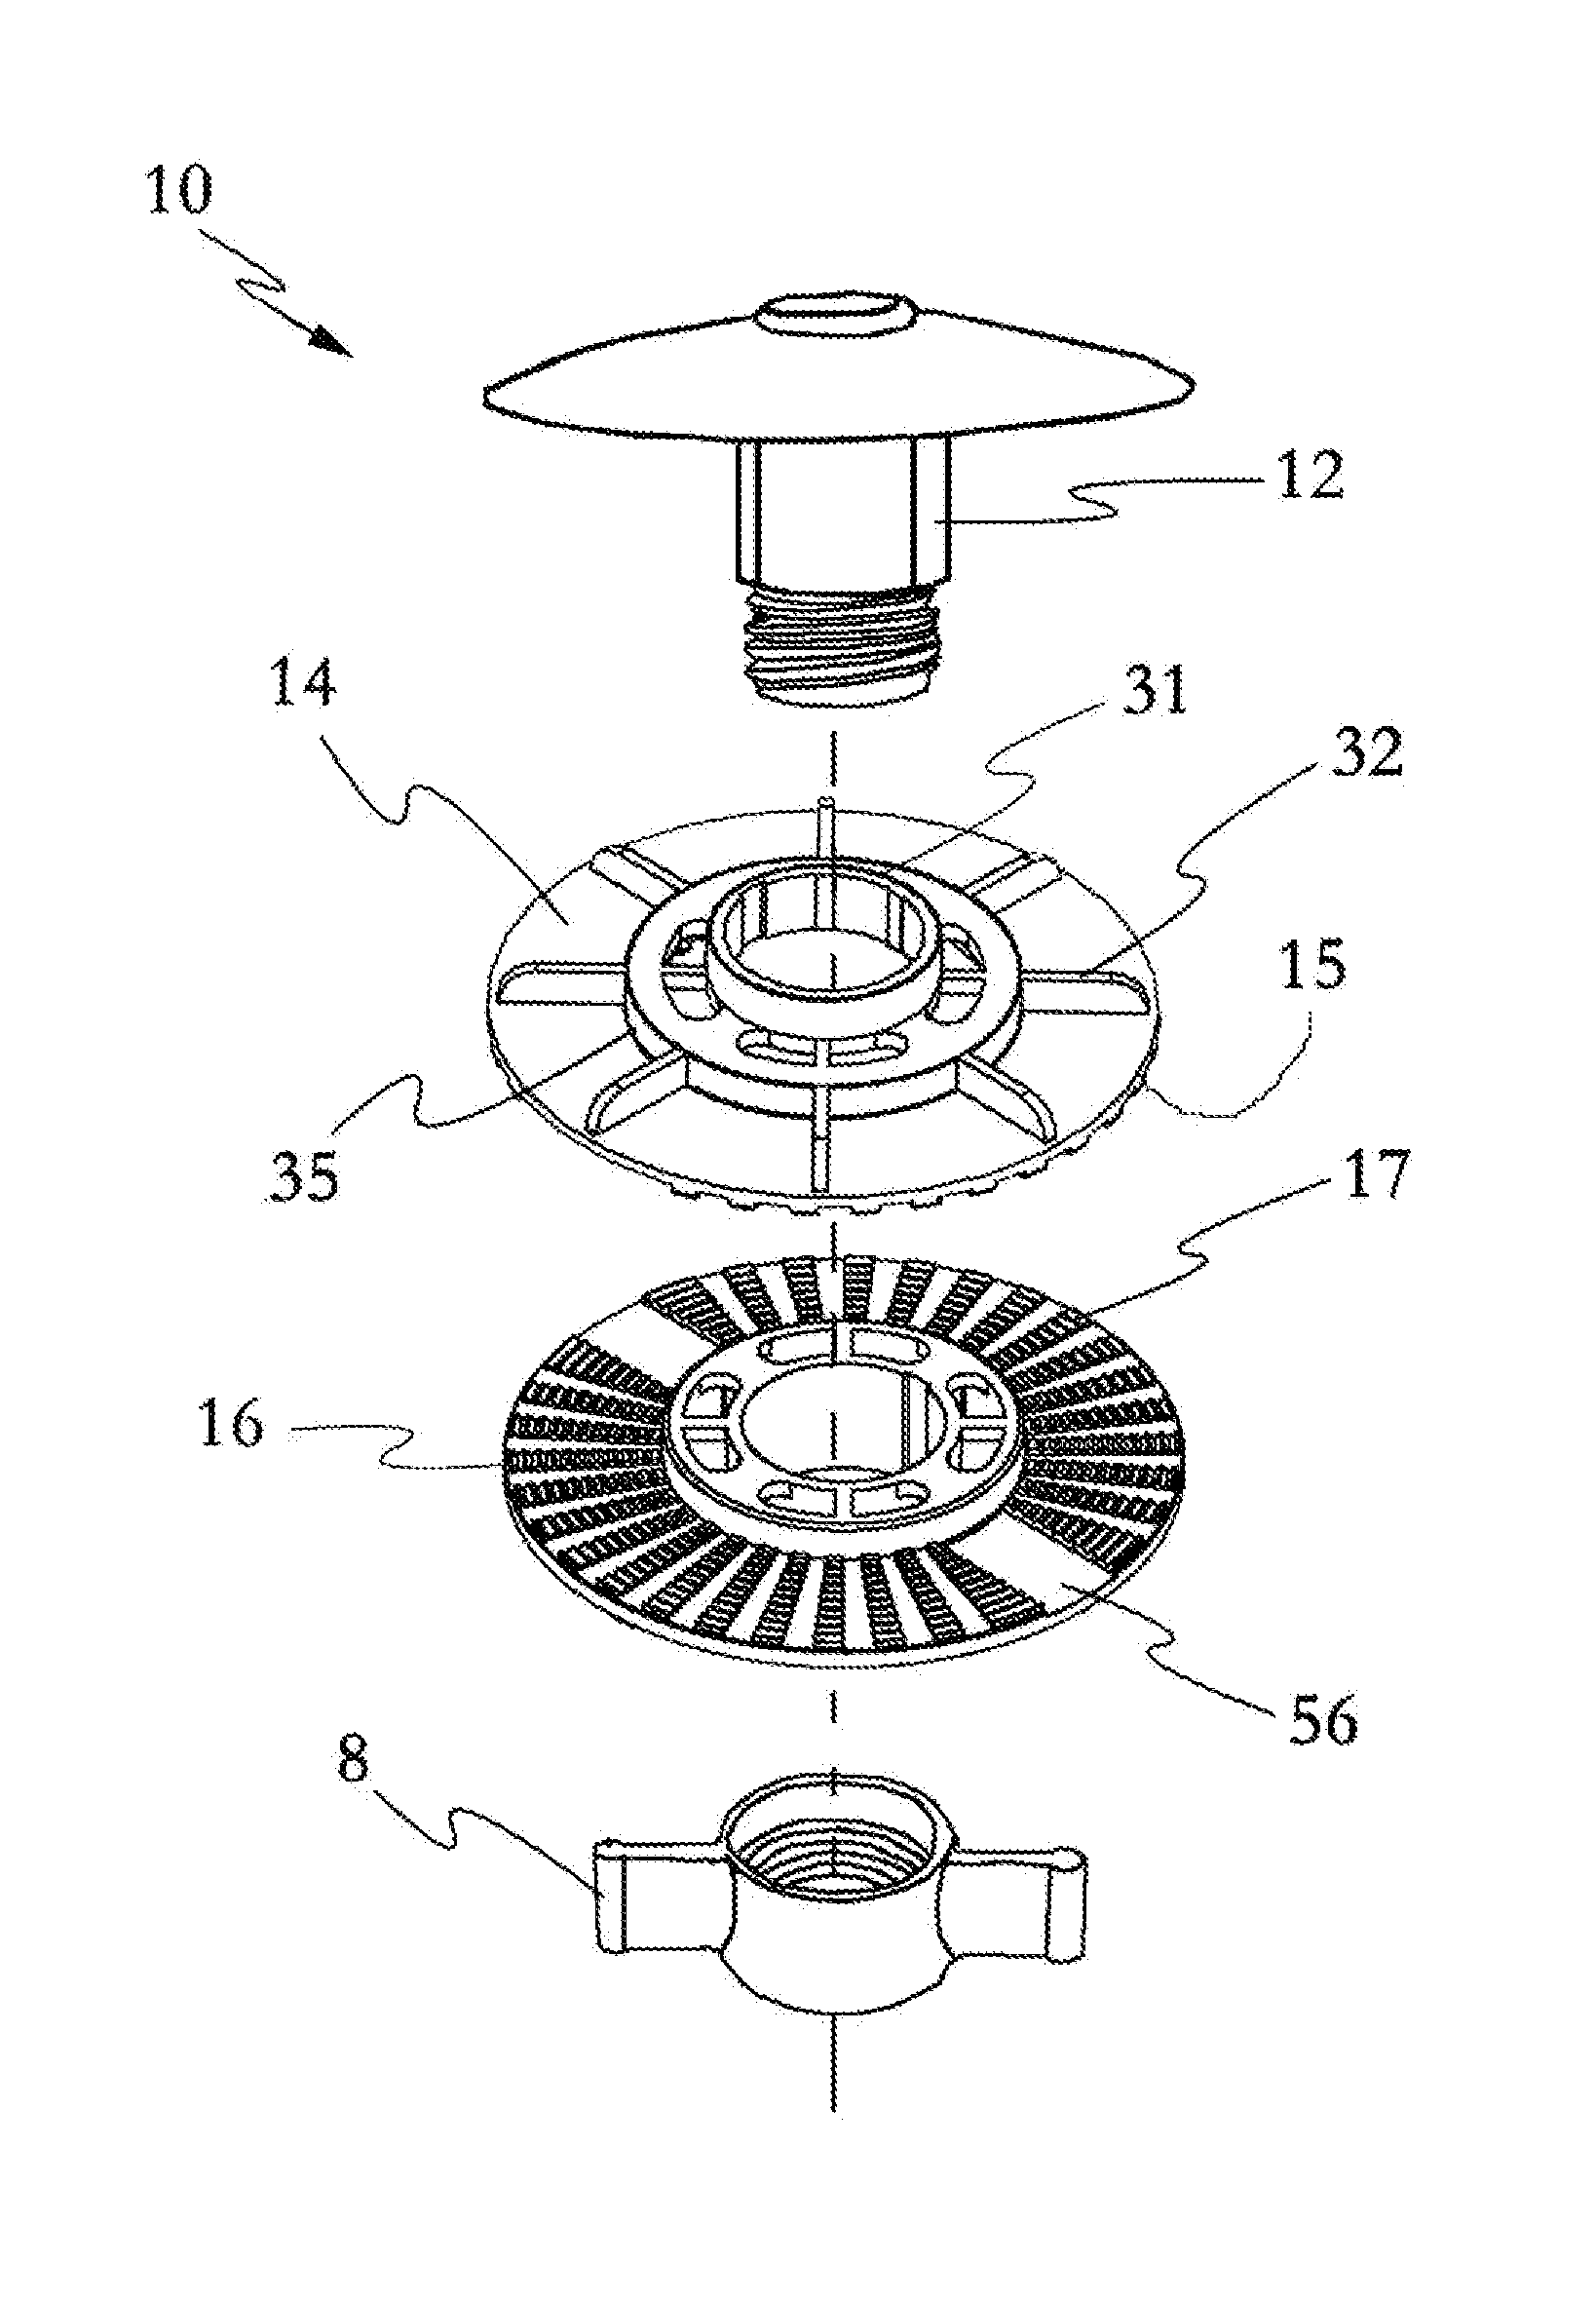 Ventilator for venting covers with improved air flow